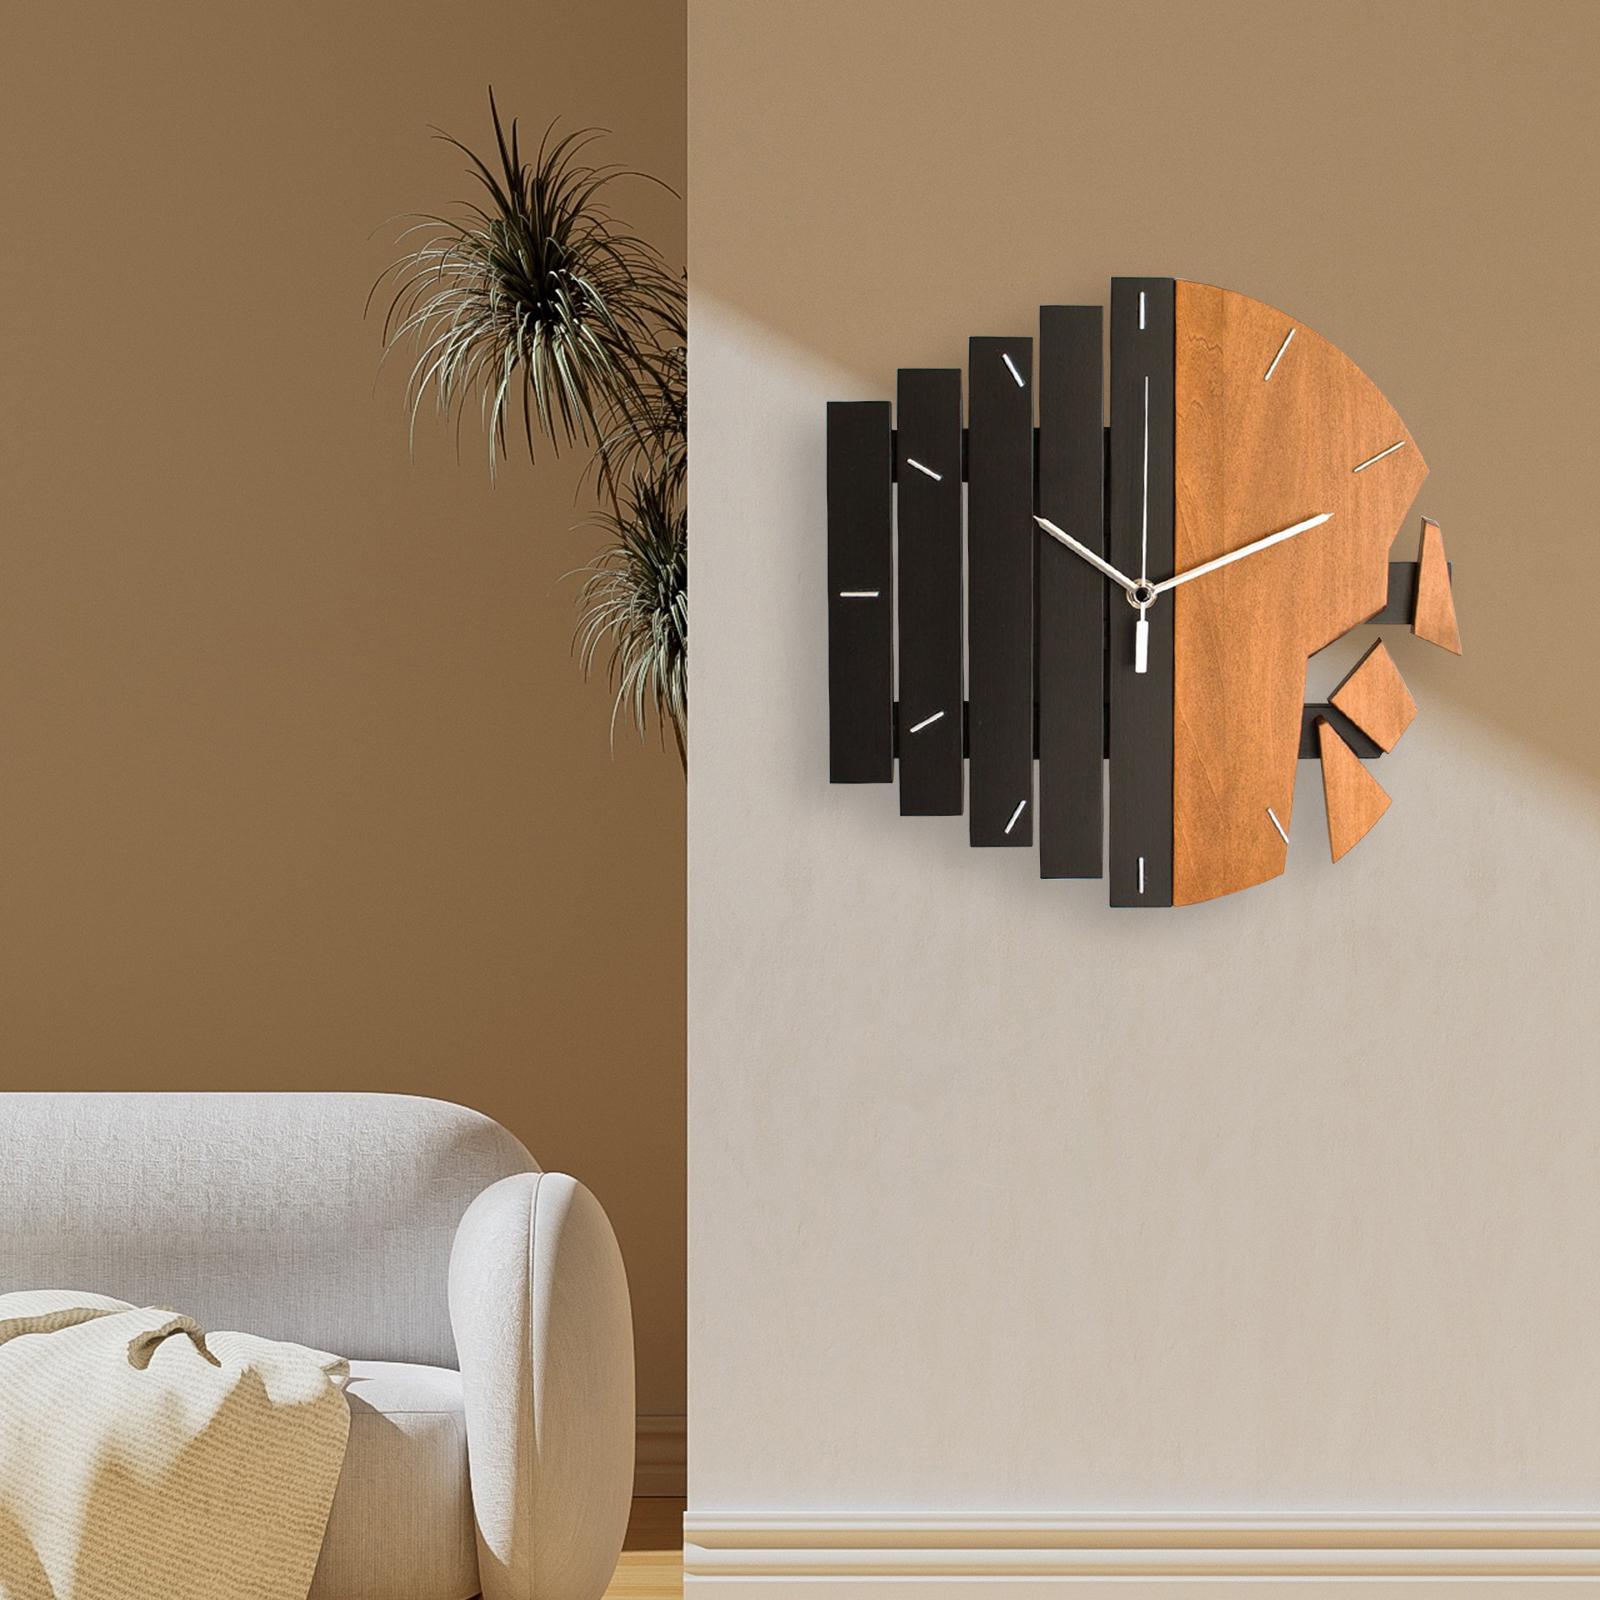 Hanging Clock Large Wall Sculpture Wall Clock for Kitchen Island Home Office